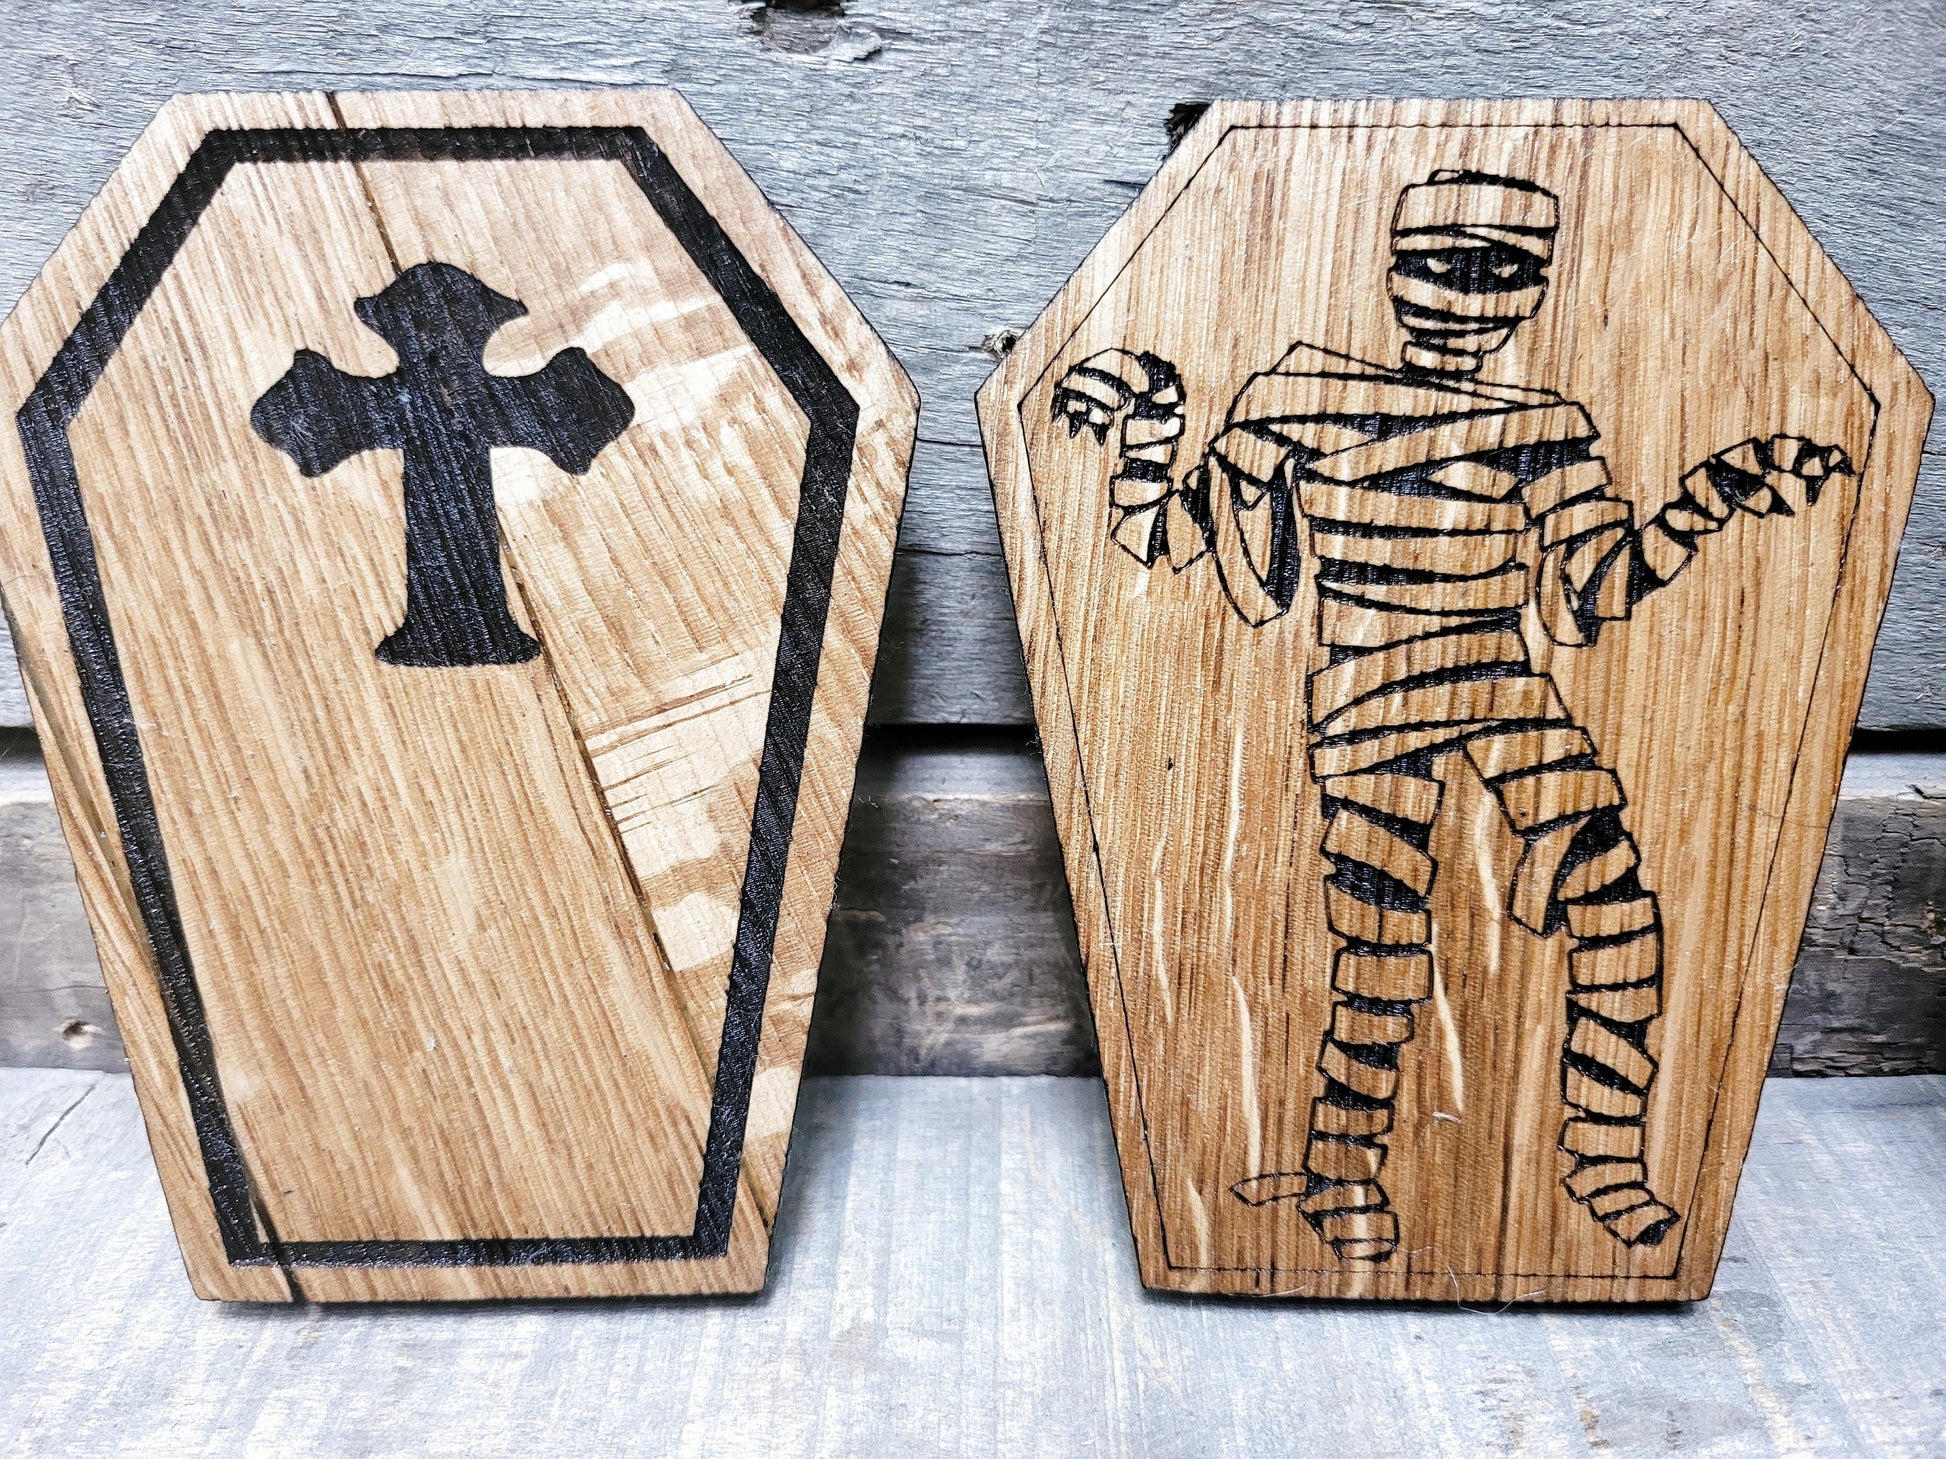 Halloween Wine Barrel Coasters - Coffin - Dracula - Mummy - Skeleton - Made from retired wine barrels - ROJO - 100% Recycled!